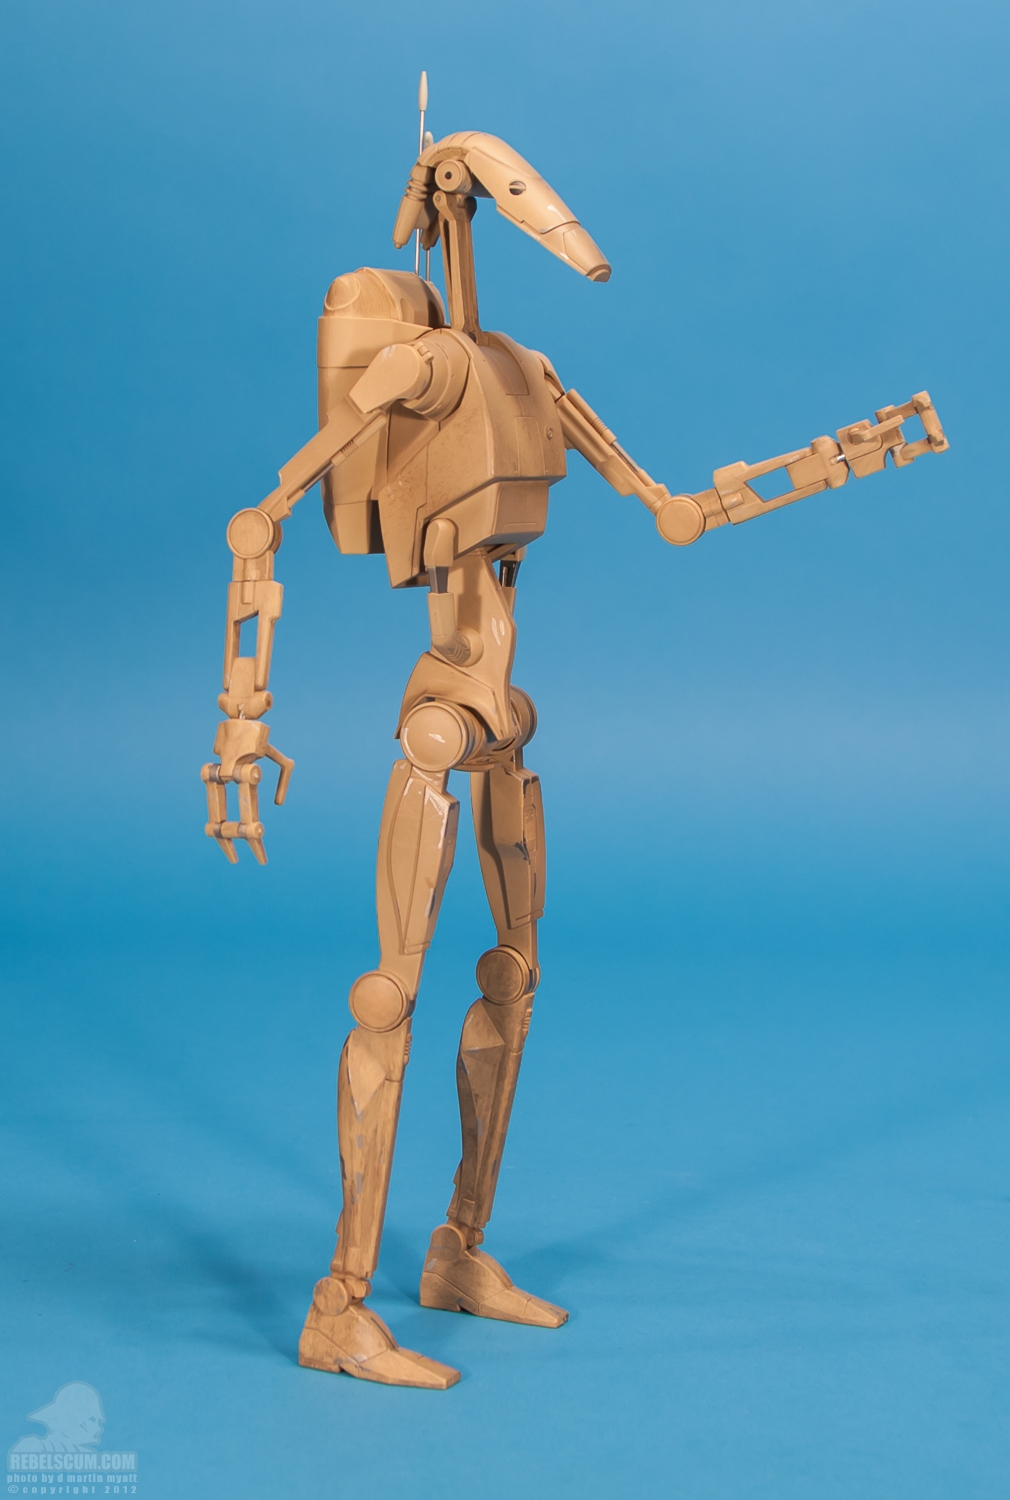 STAP_Battle_Droid_Star_Wars_Sideshow_Collectibles-10.jpg